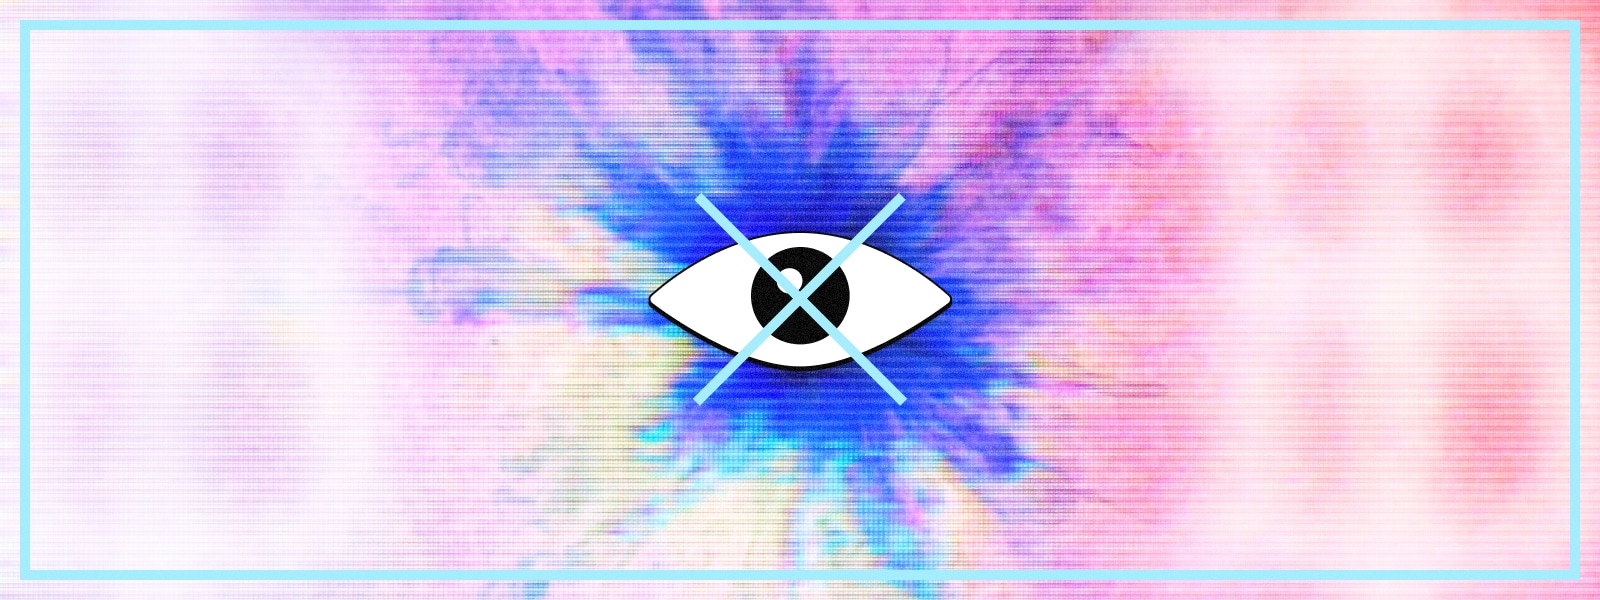 Illustration of an eye, with a cross on top of an ink blot background